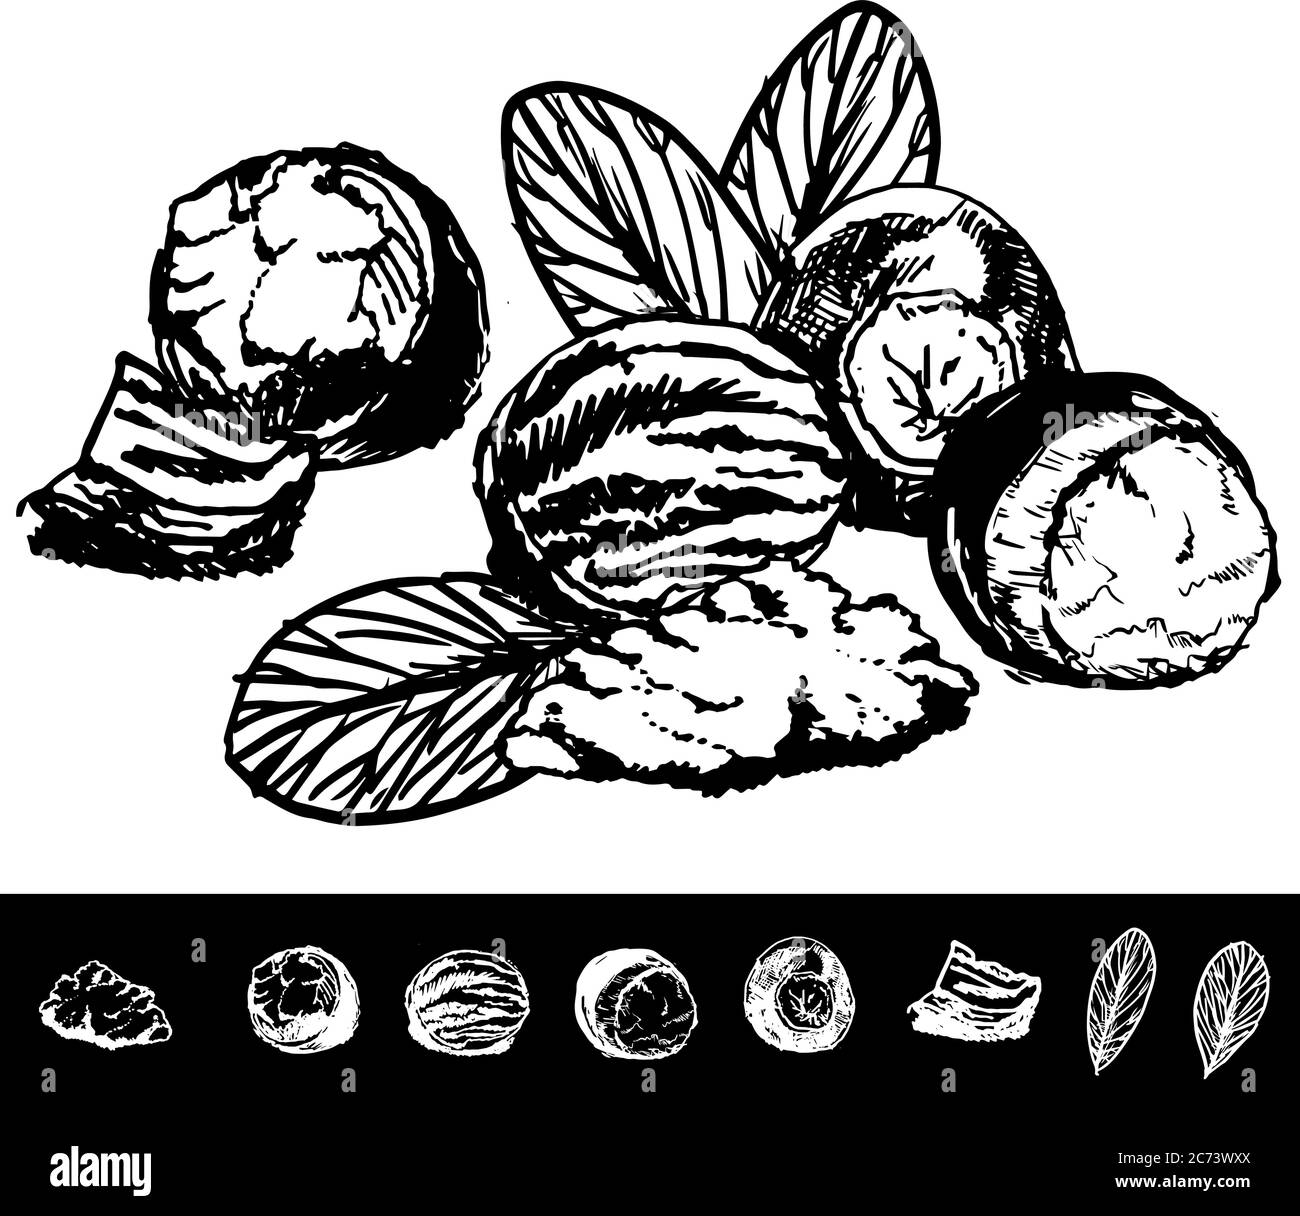 Black and white line drawing of Shea butter fruit. Shea butter is a fat extracted from the nut of the African shea tree. It has as so many benefits fo Stock Vector